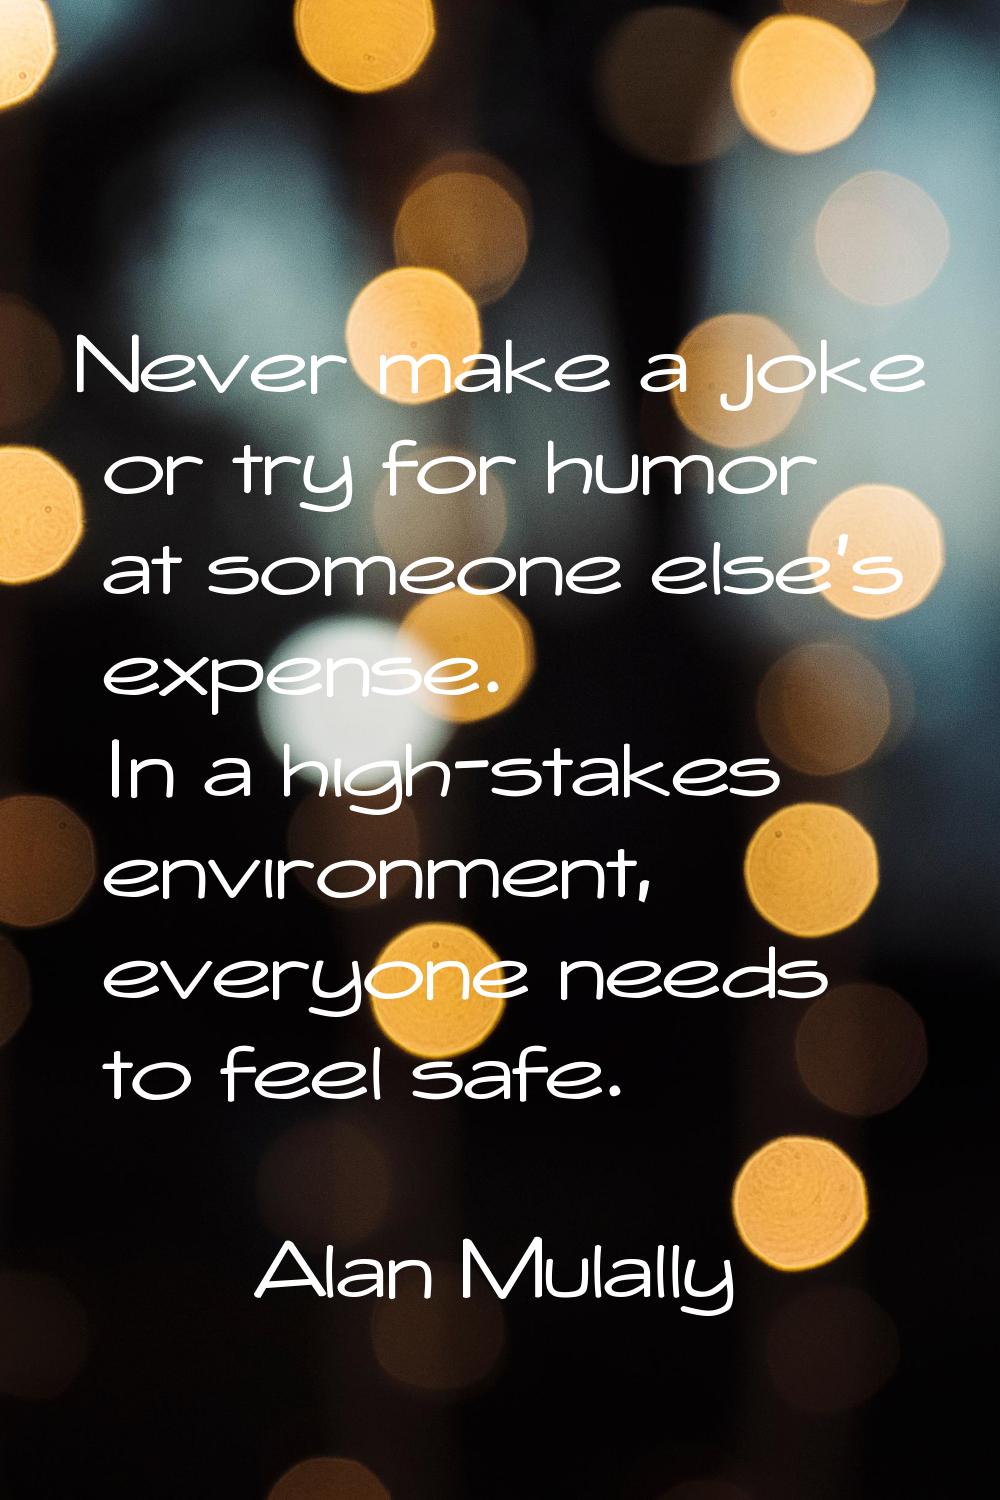 Never make a joke or try for humor at someone else's expense. In a high-stakes environment, everyon